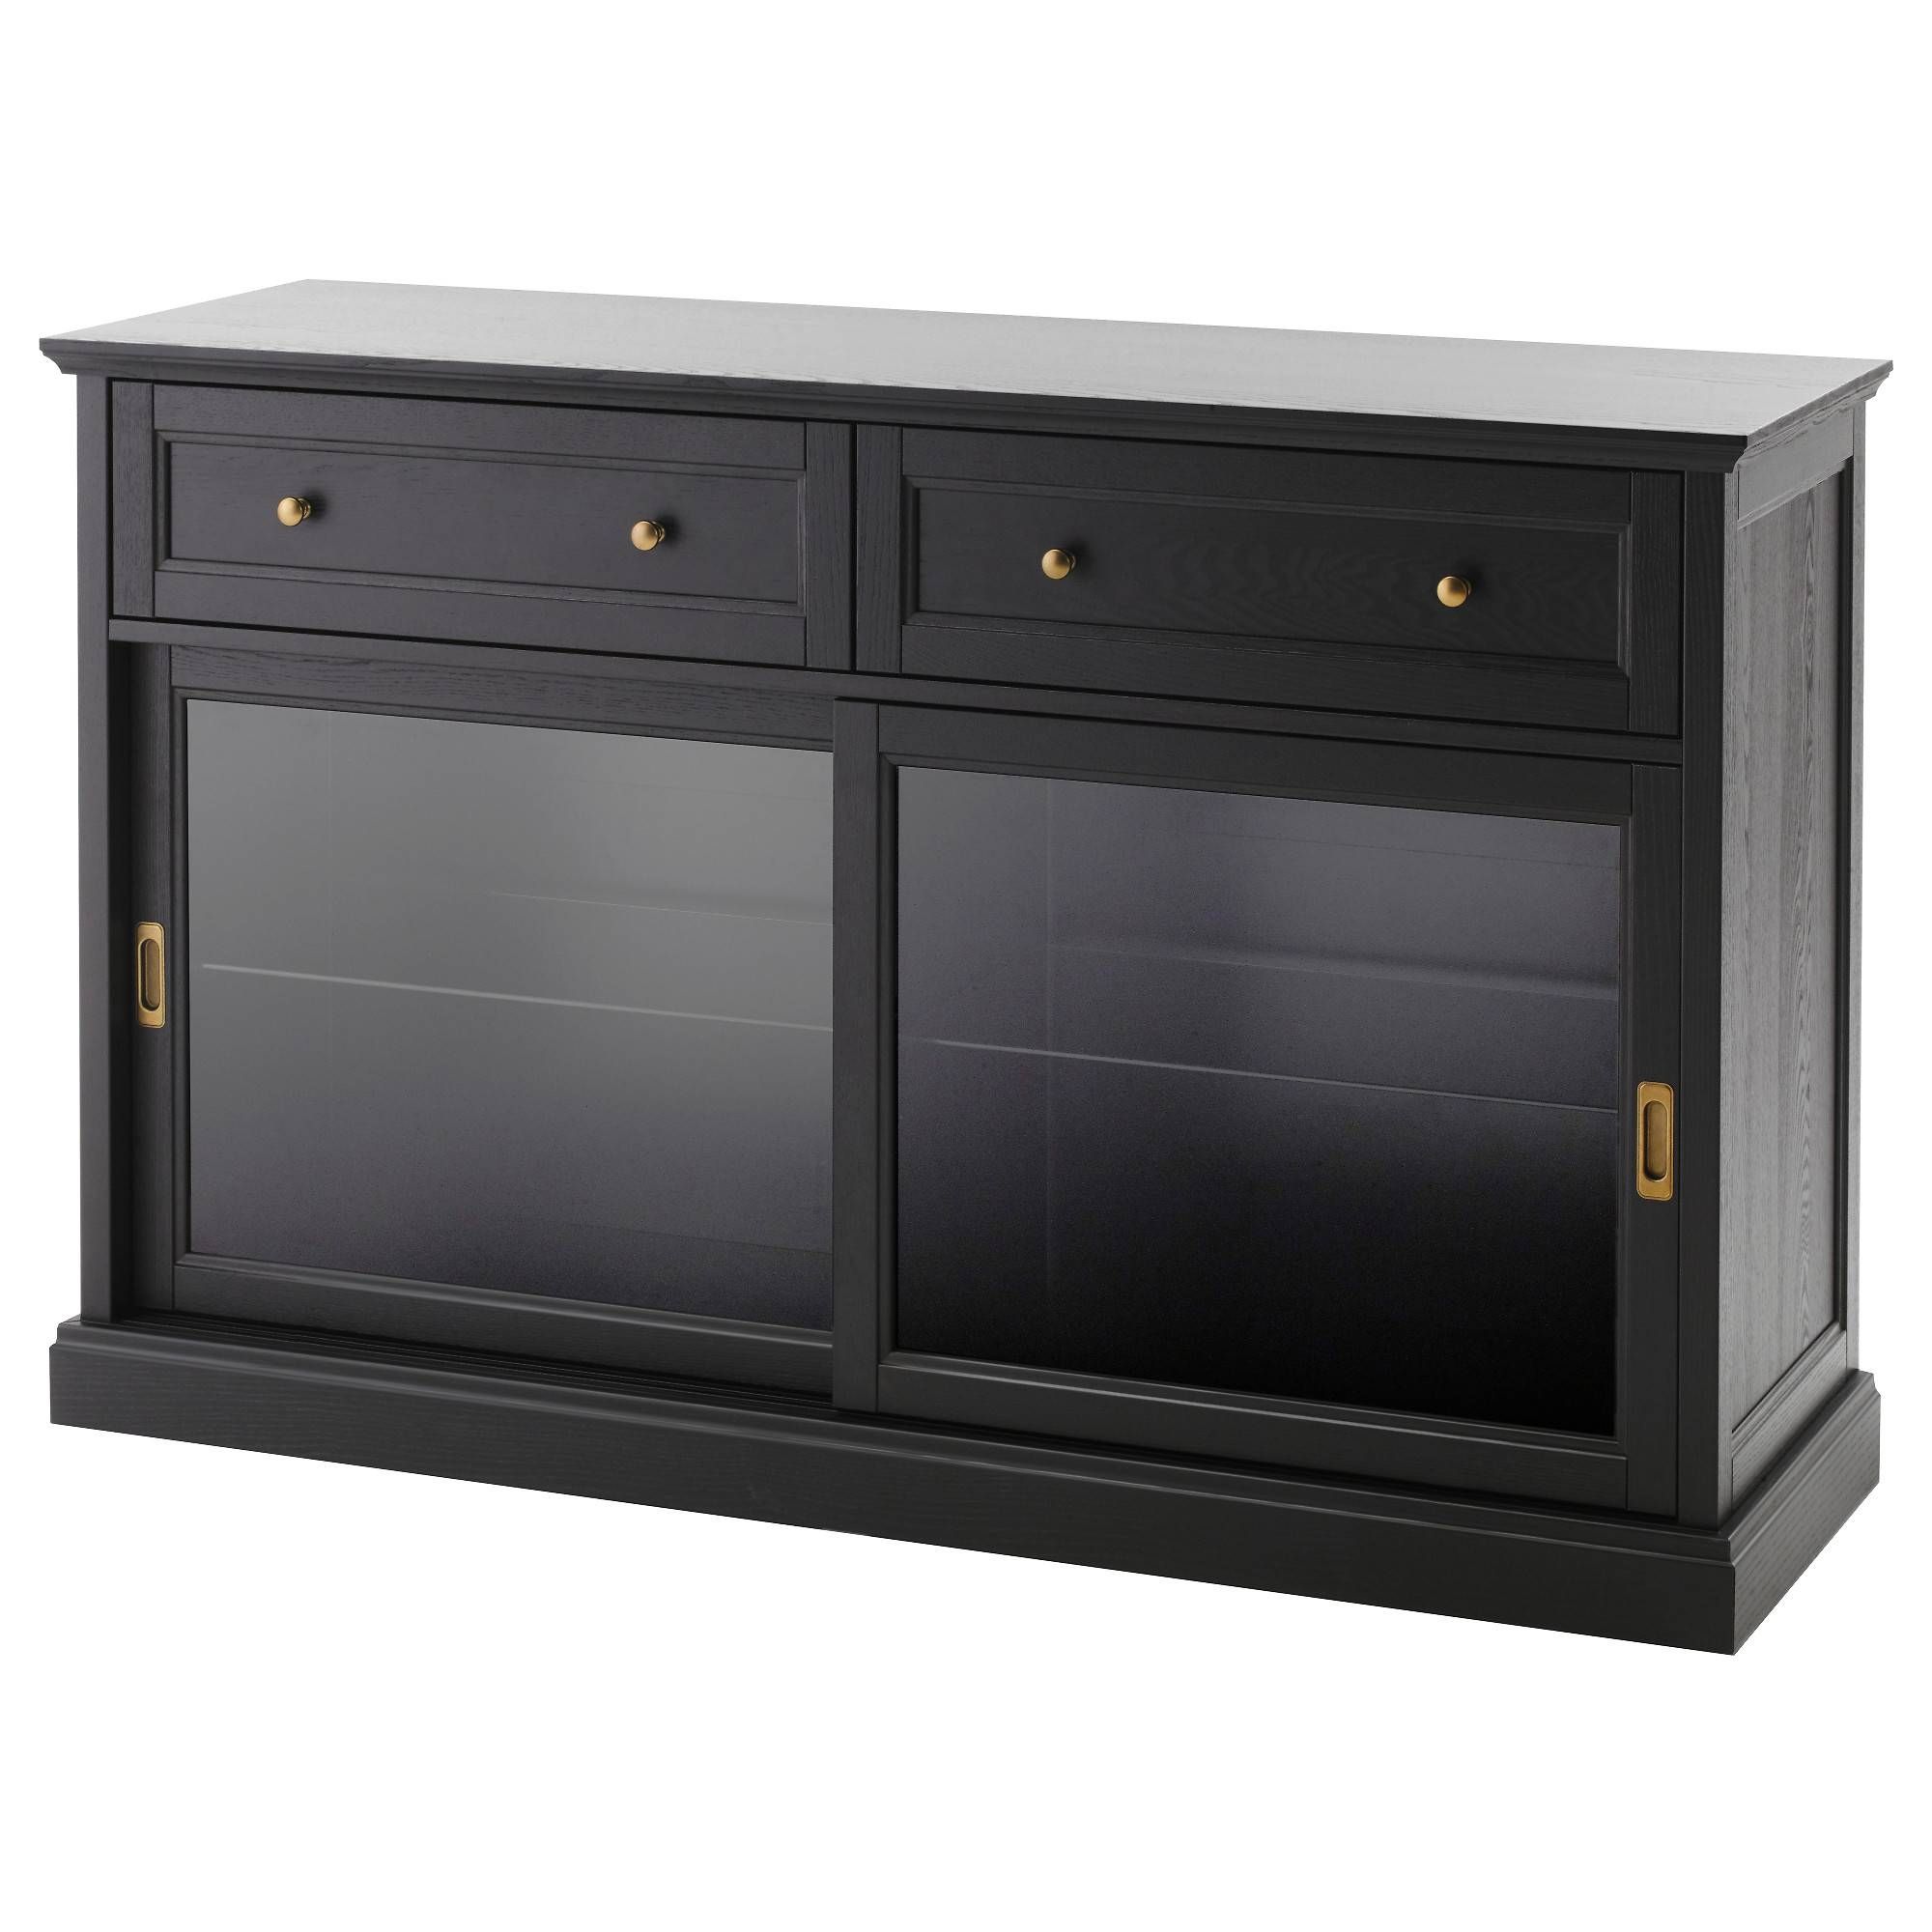 Sideboards & Buffet Cabinets | Ikea Within Sideboard Units (View 12 of 20)